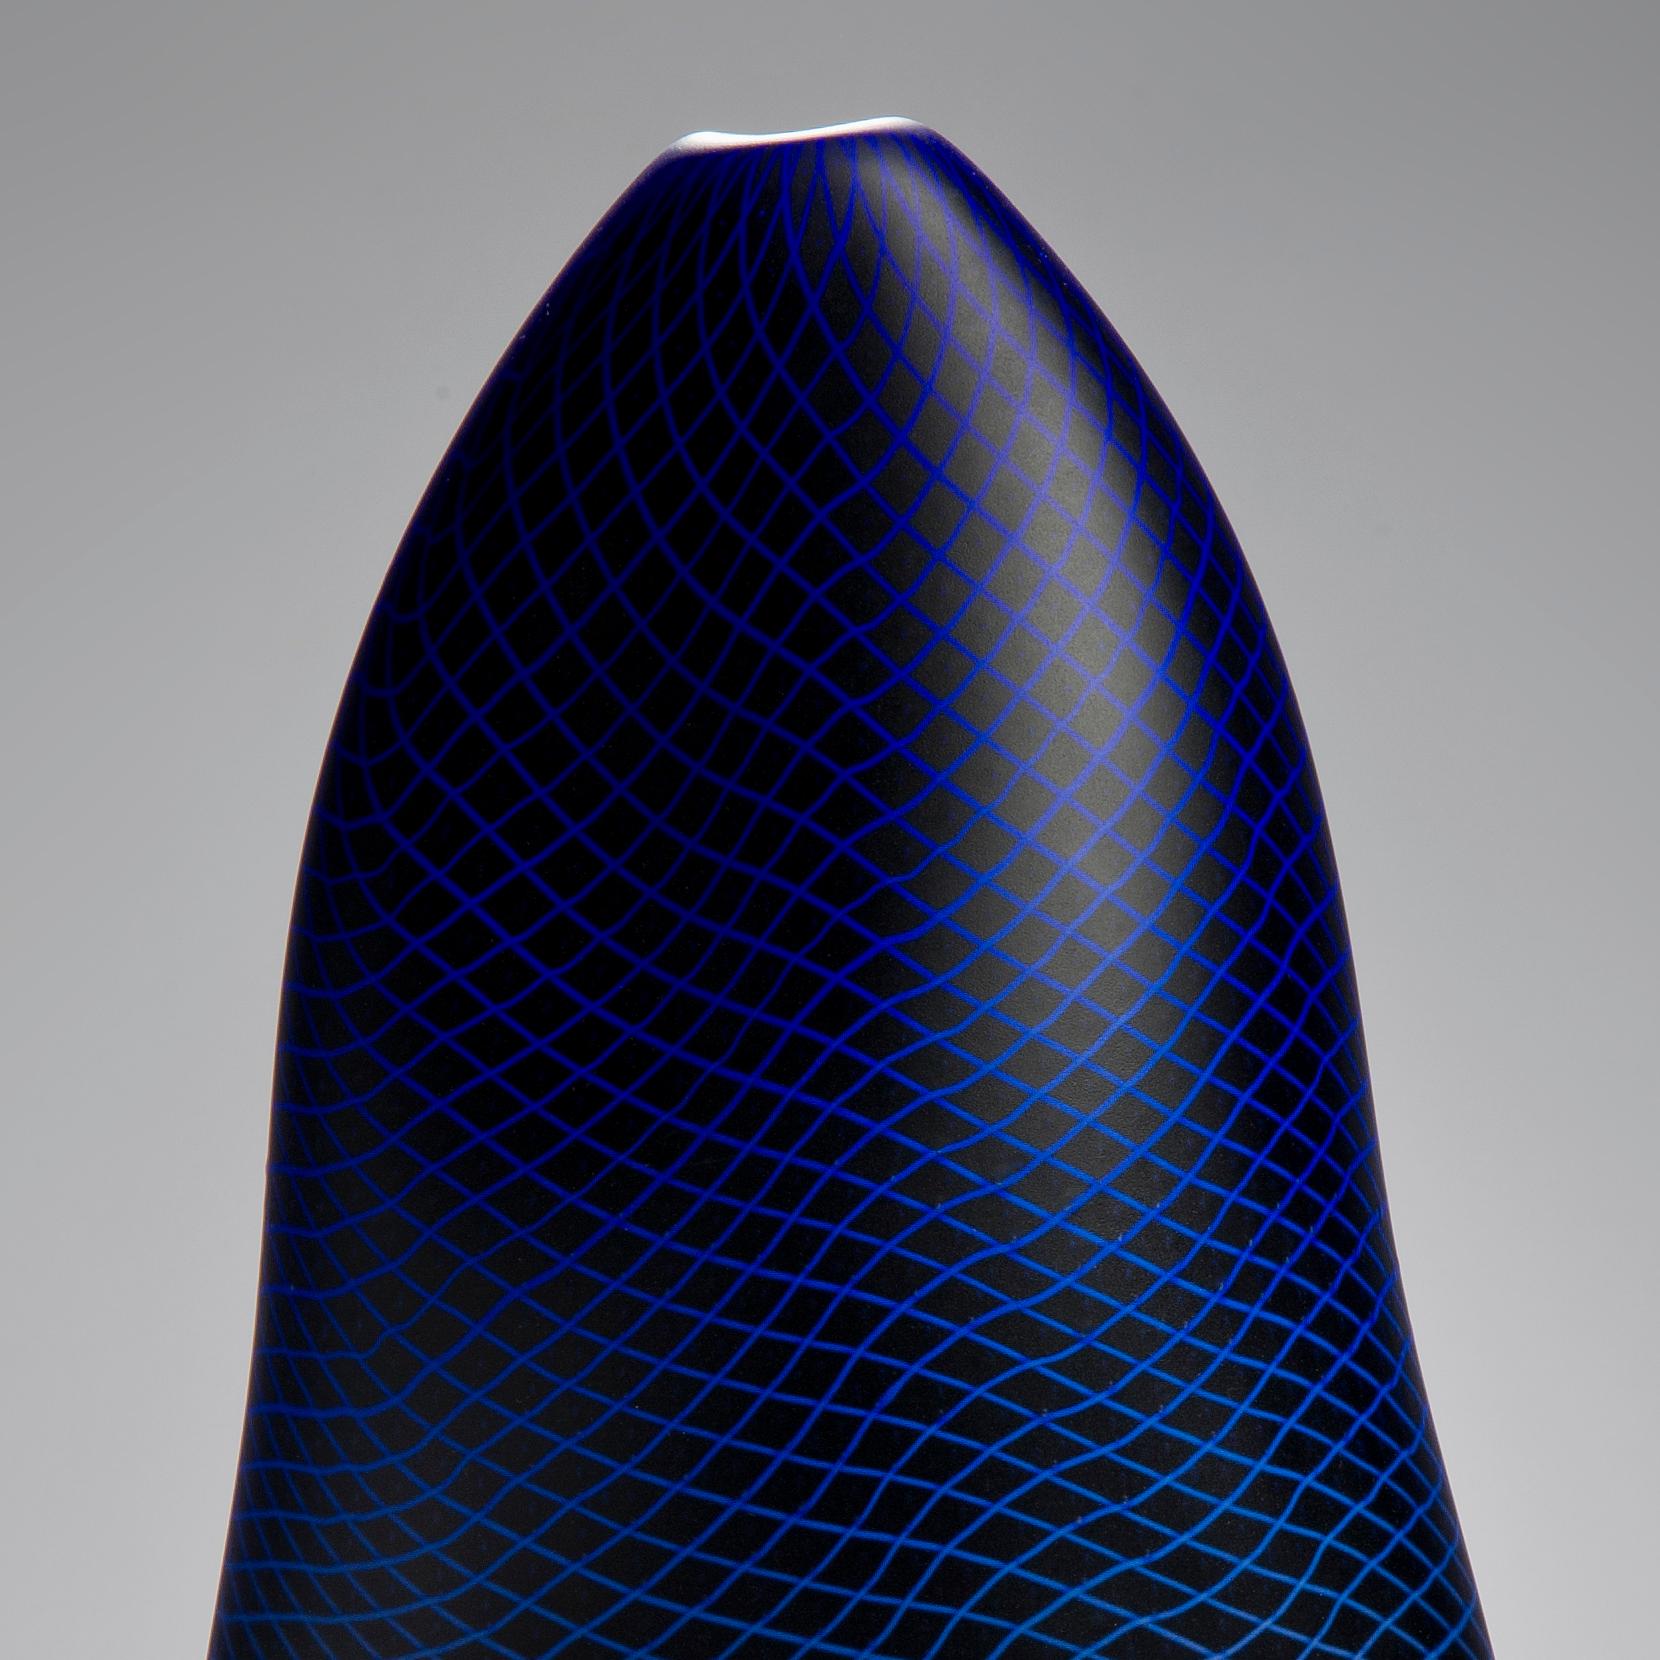 Organic Modern Warp/Fade/Distort 001, a Glass Vessel in Purple, Black and Blue by Liam Reeves